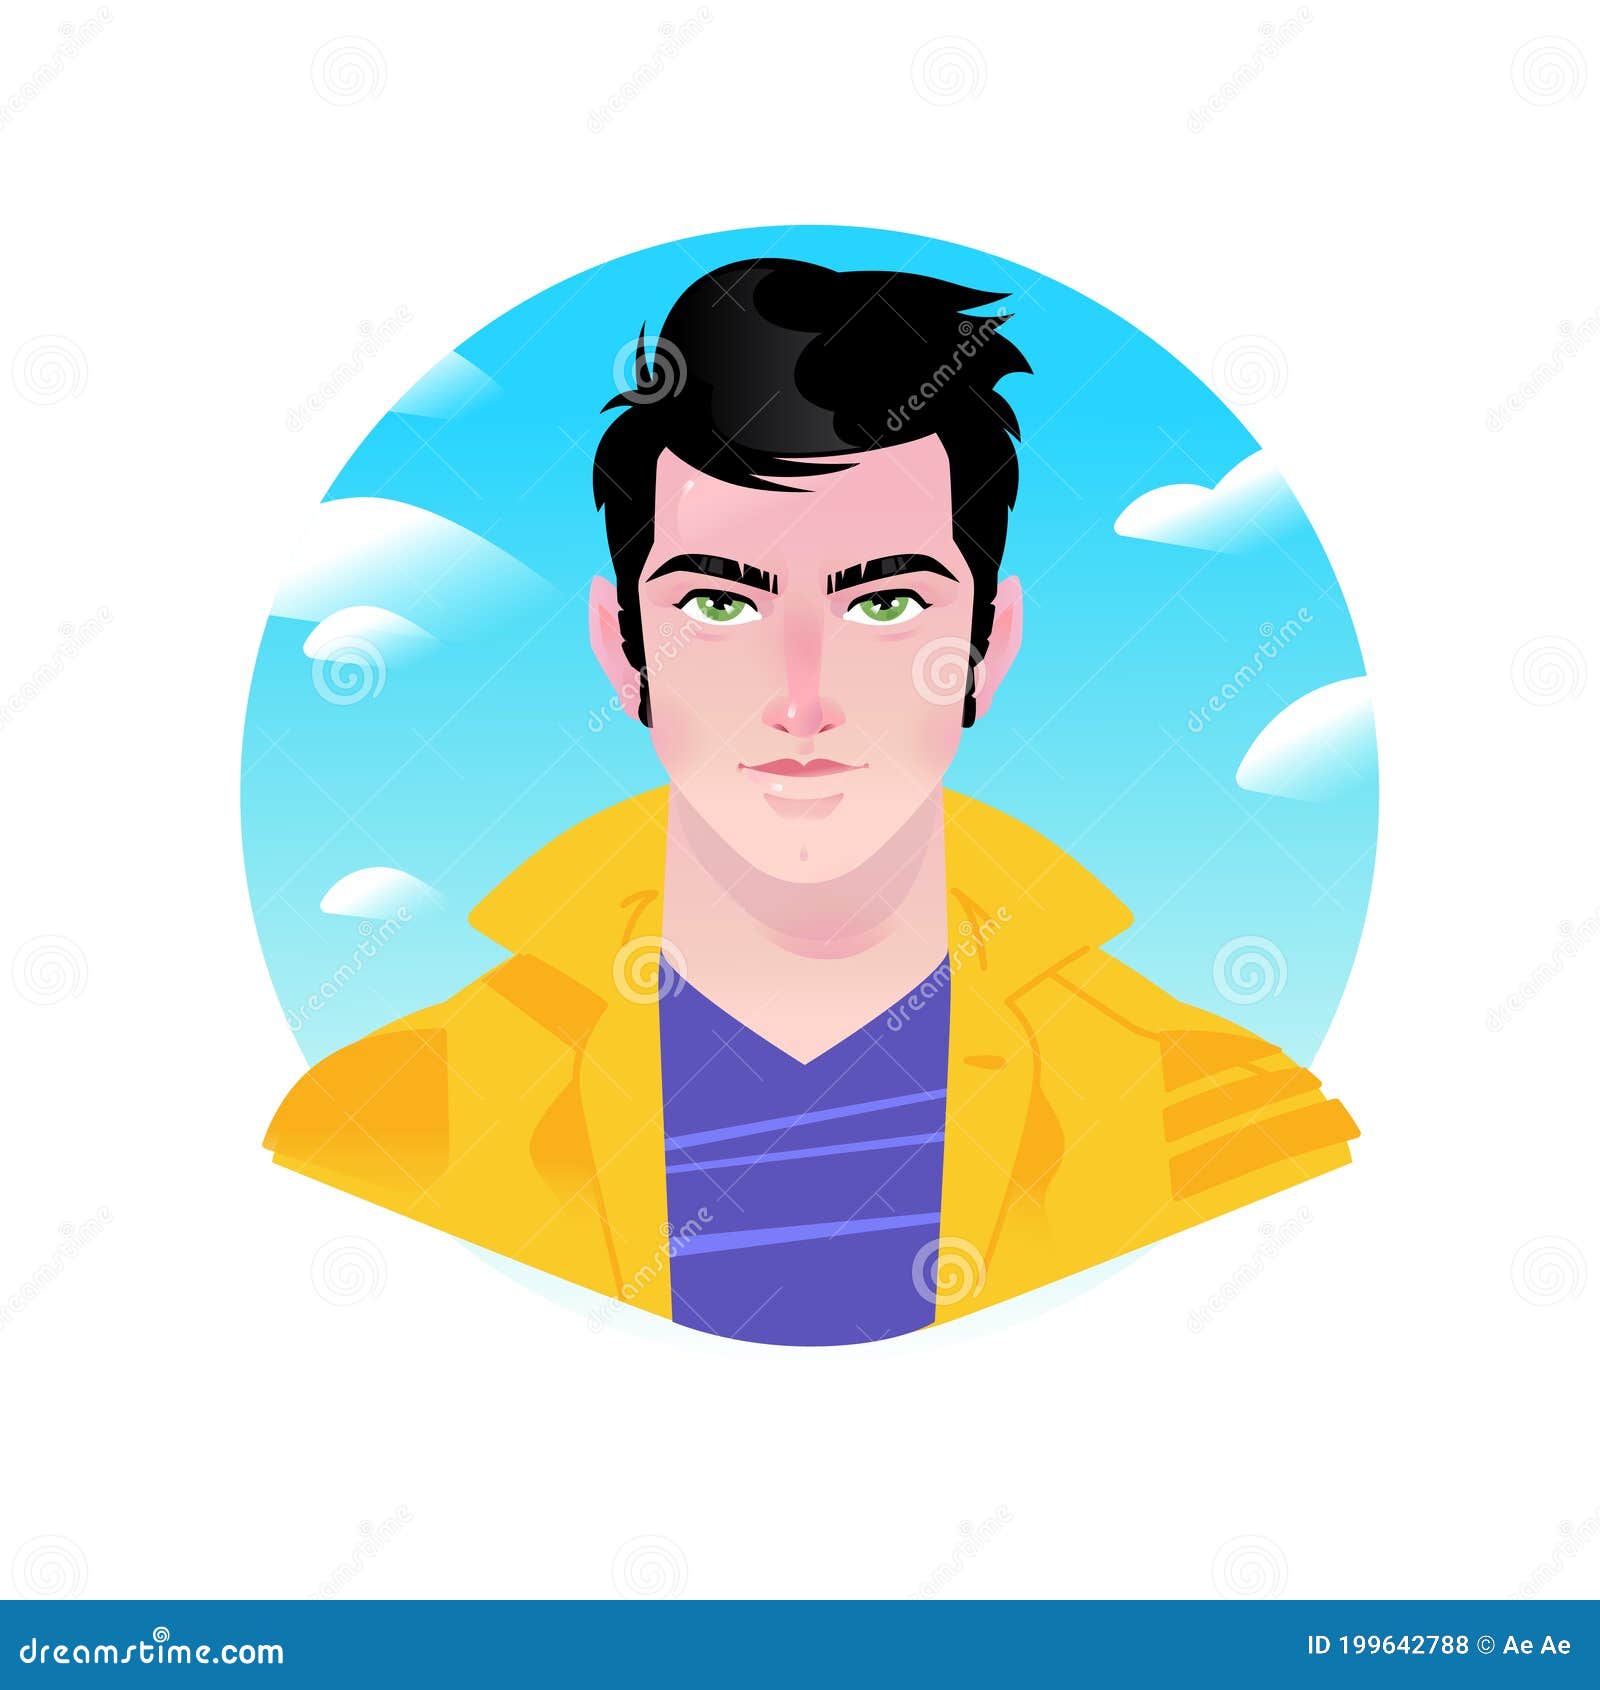 Premium Vector  A bright and stylish illustration of a man